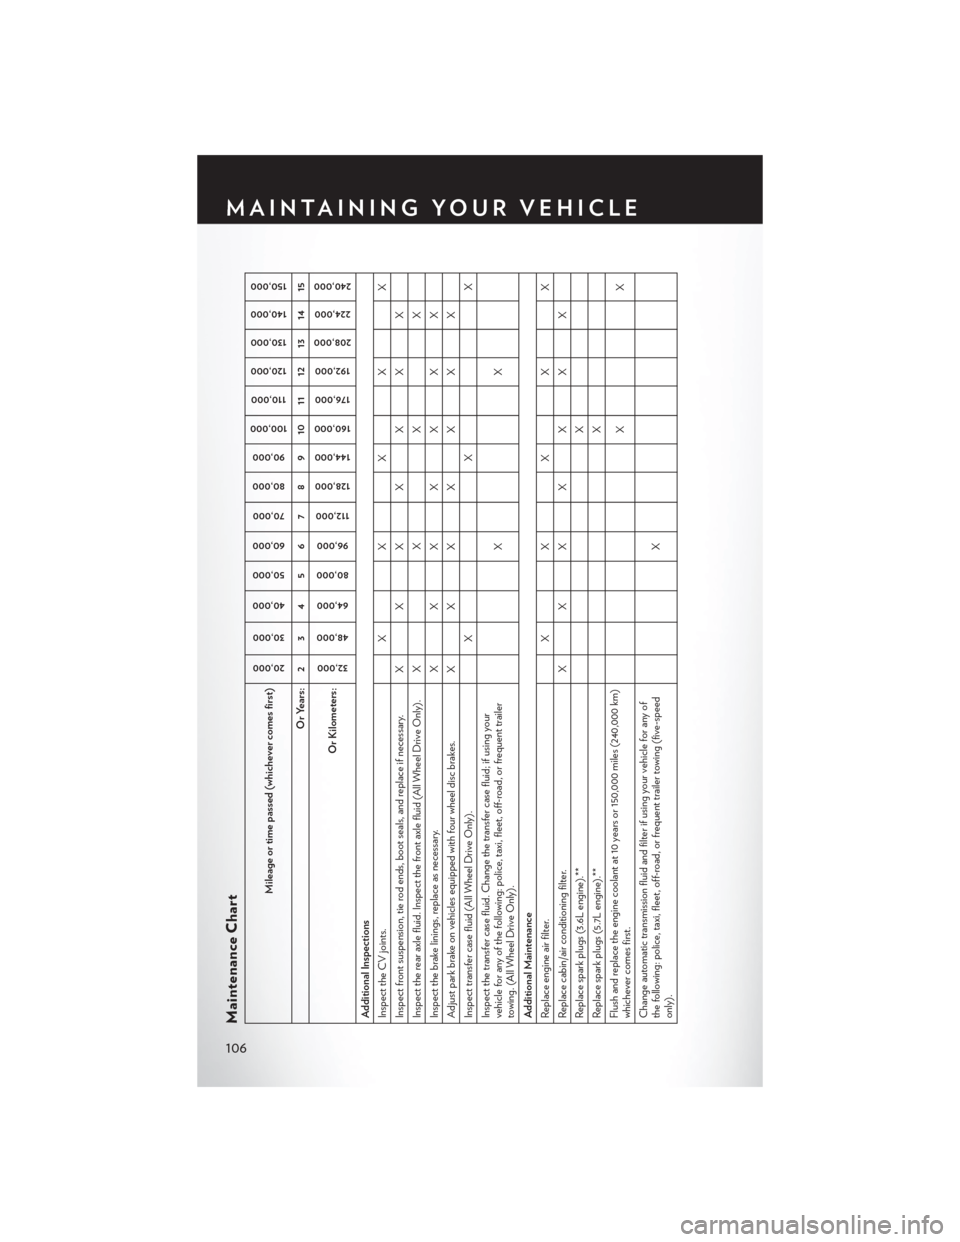 CHRYSLER 300 2014 2.G User Guide Maintenance Chart
Mileage or time passed (whichever comes first)
20,00030,000
40,000 50,000
60,000 70,000
80,000 90,000
100,000
110,000
120,000 130,000
140,000 150,000
Or Years: 2 3 4 5 6 7 8 9 10 11 